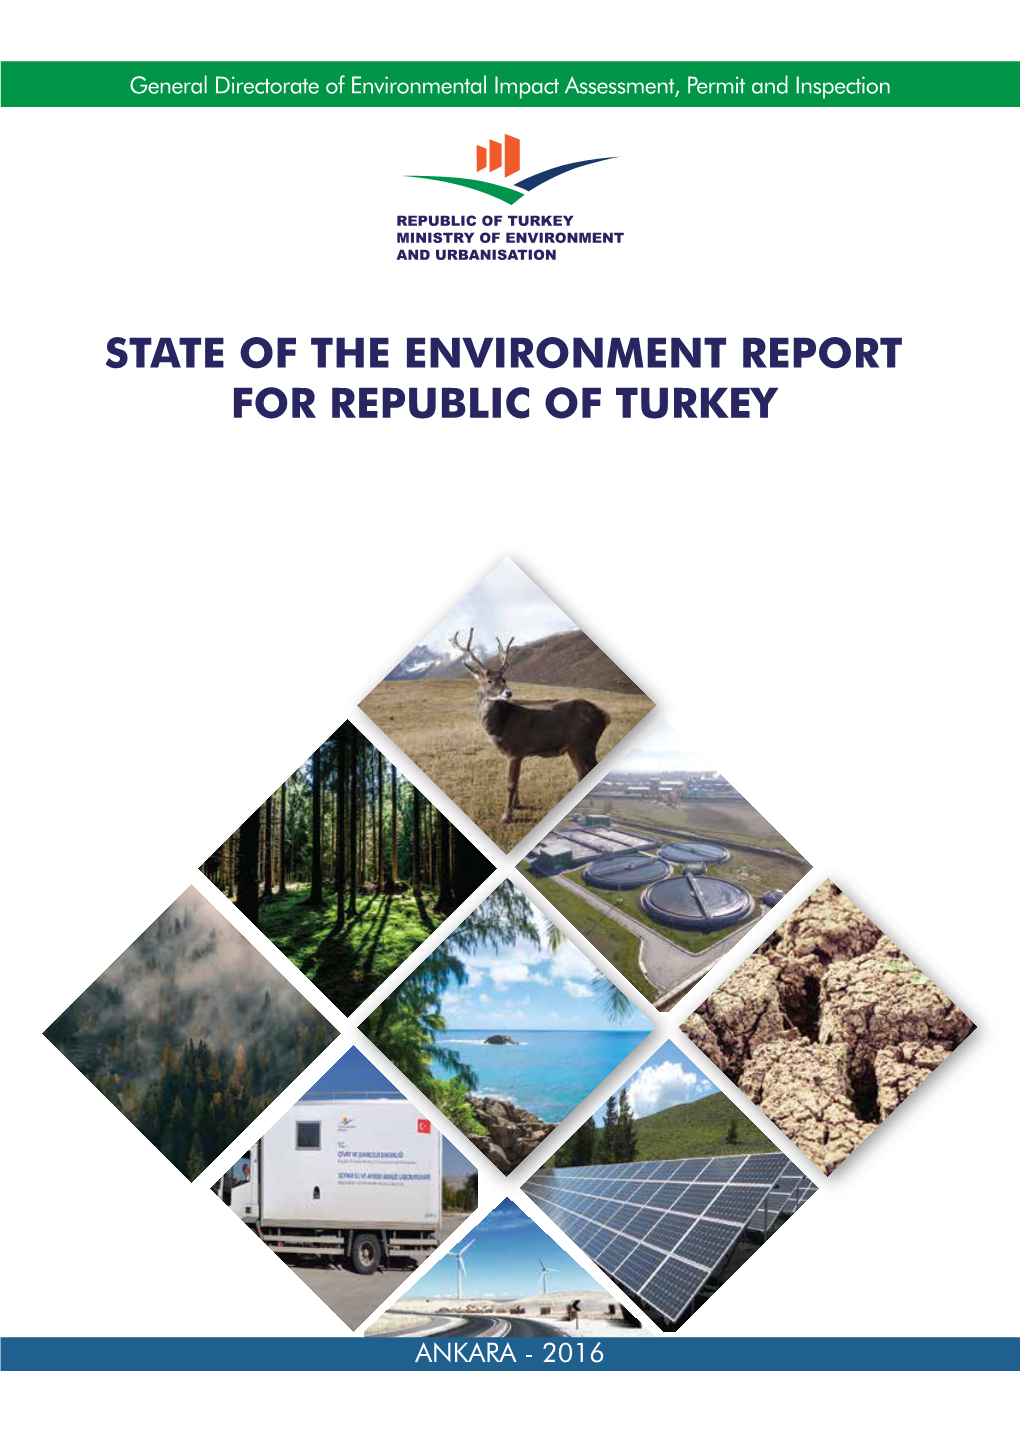 State of the Environment Report for the Republic of Turkey